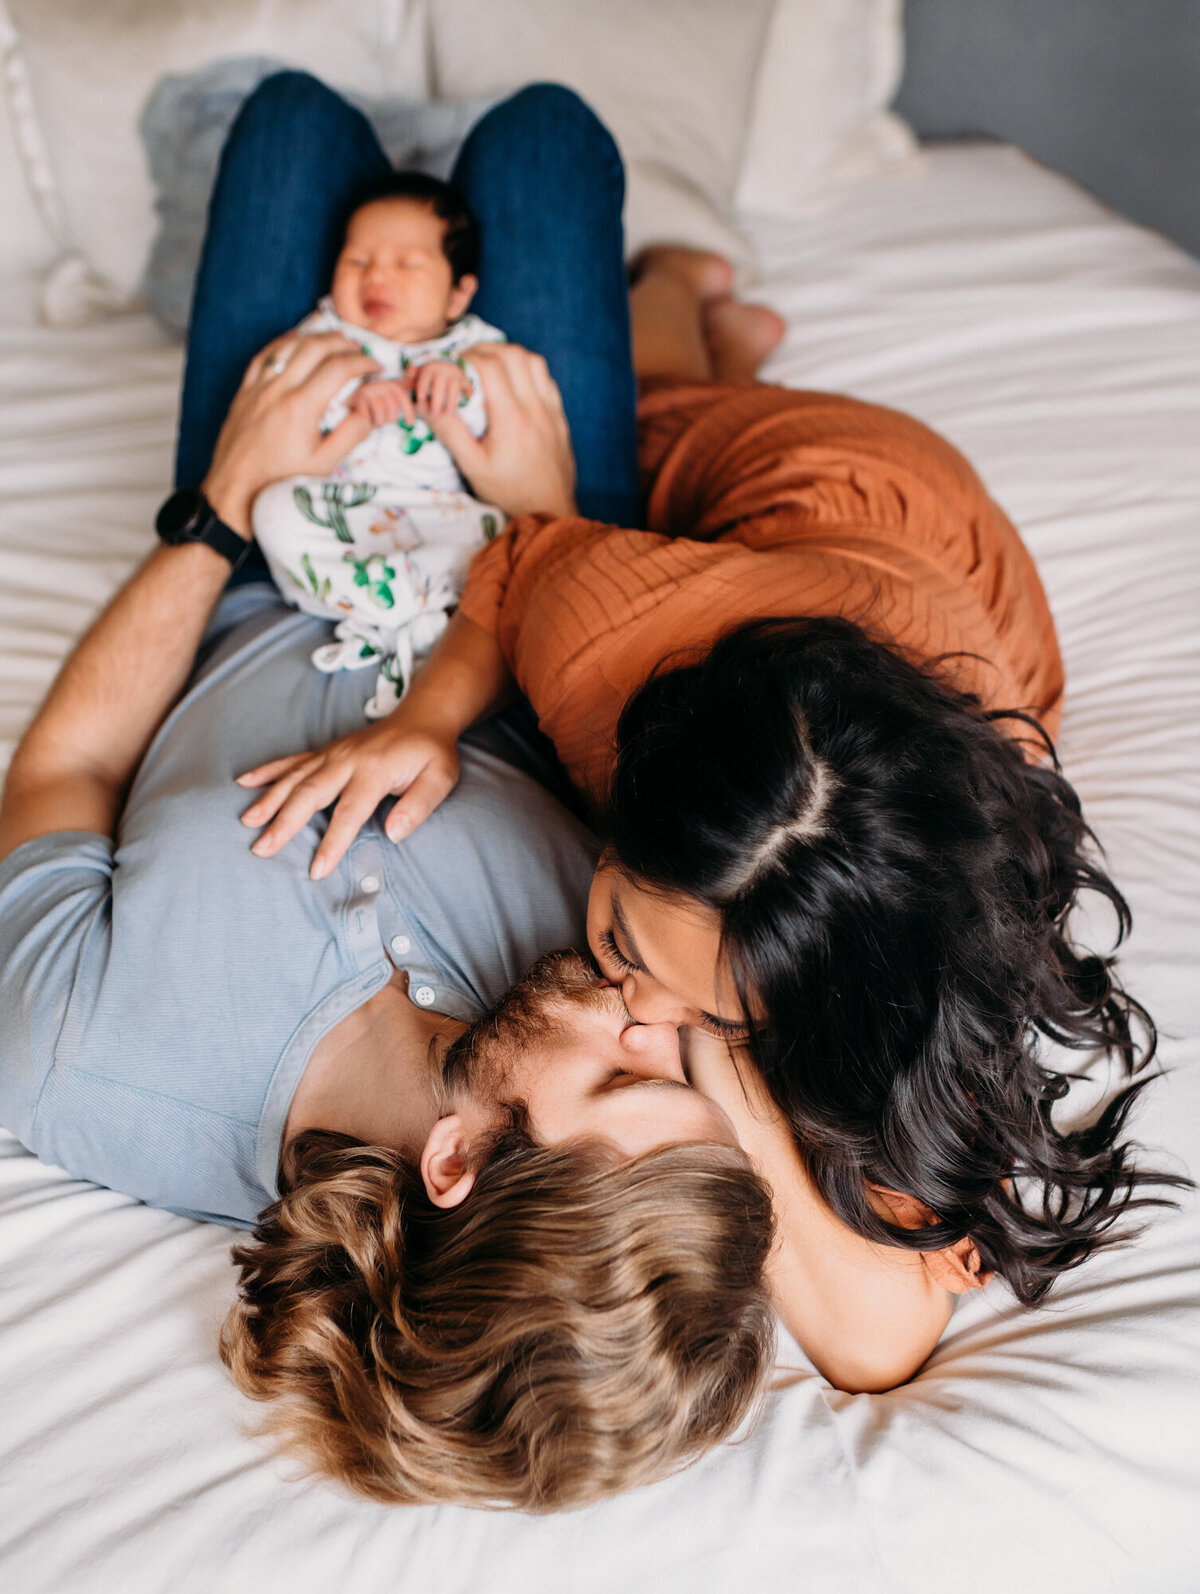 Newborn Photographer, Mom and dad lying down on bed and kissing each other while baby girl stays on dad's lap.